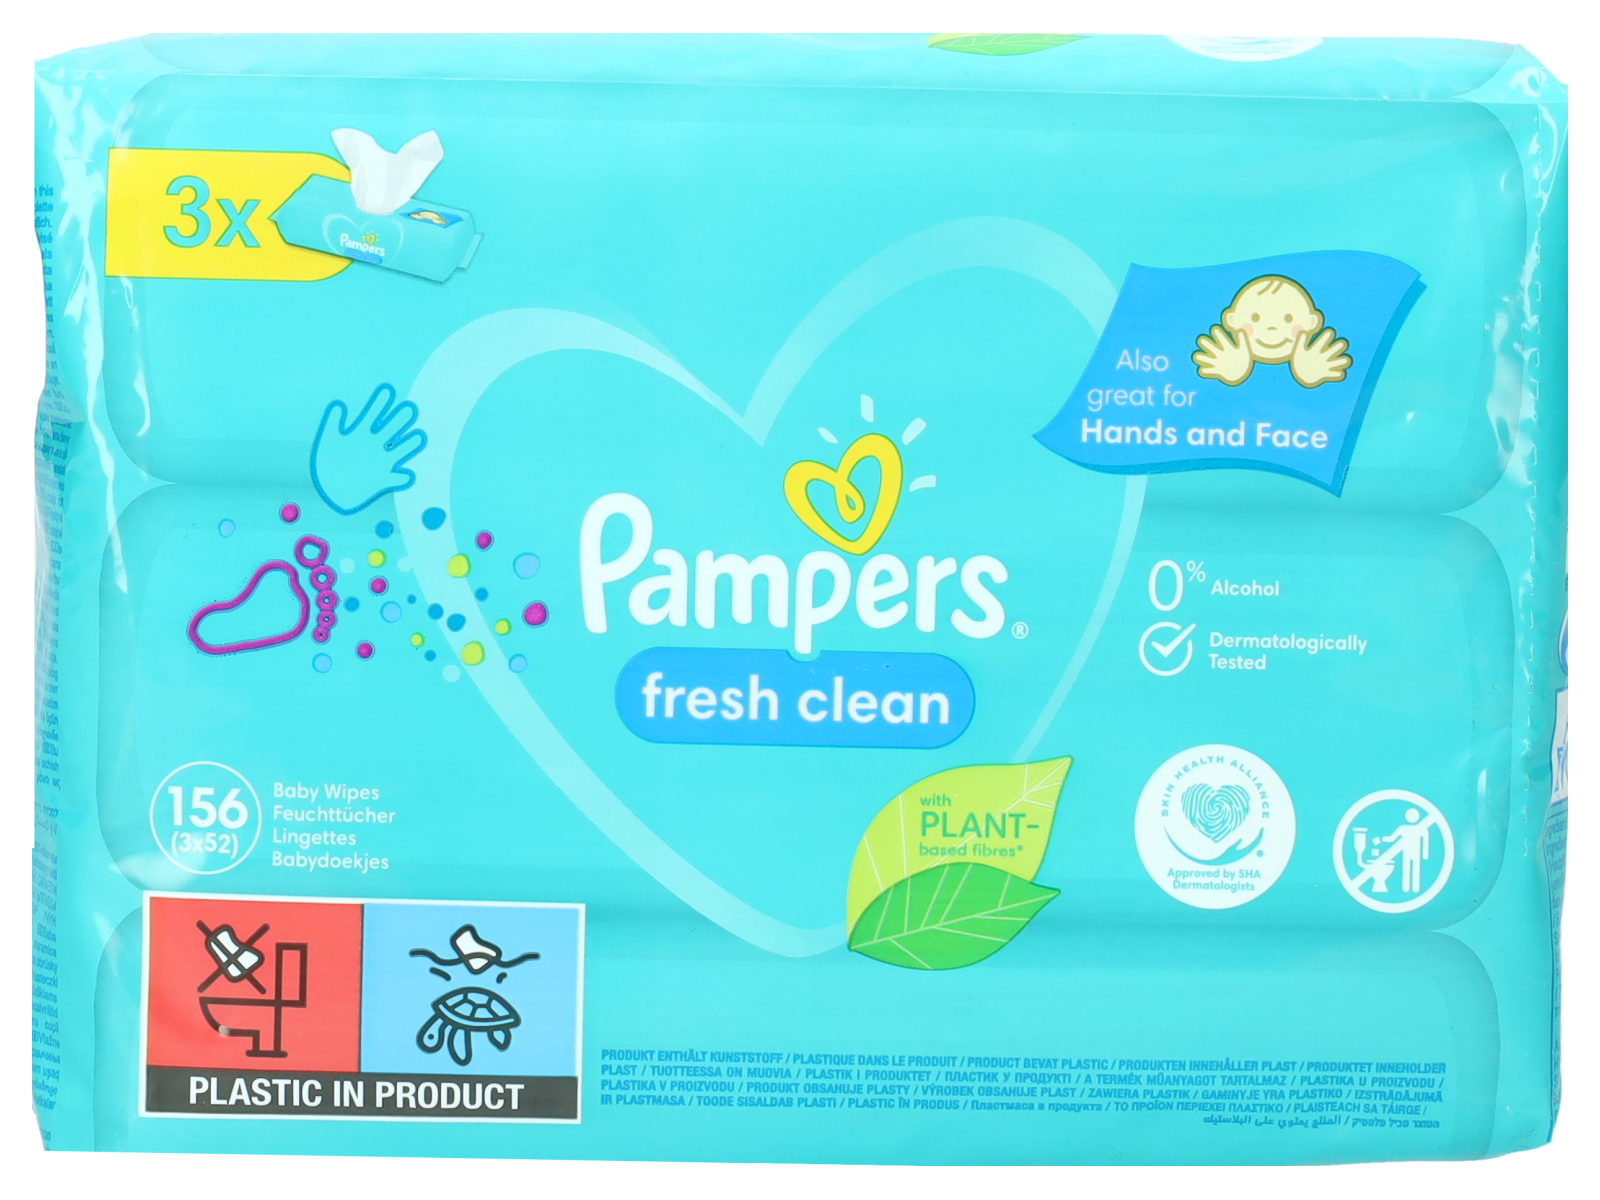 Pampers lingettes kandoo : King of the throne